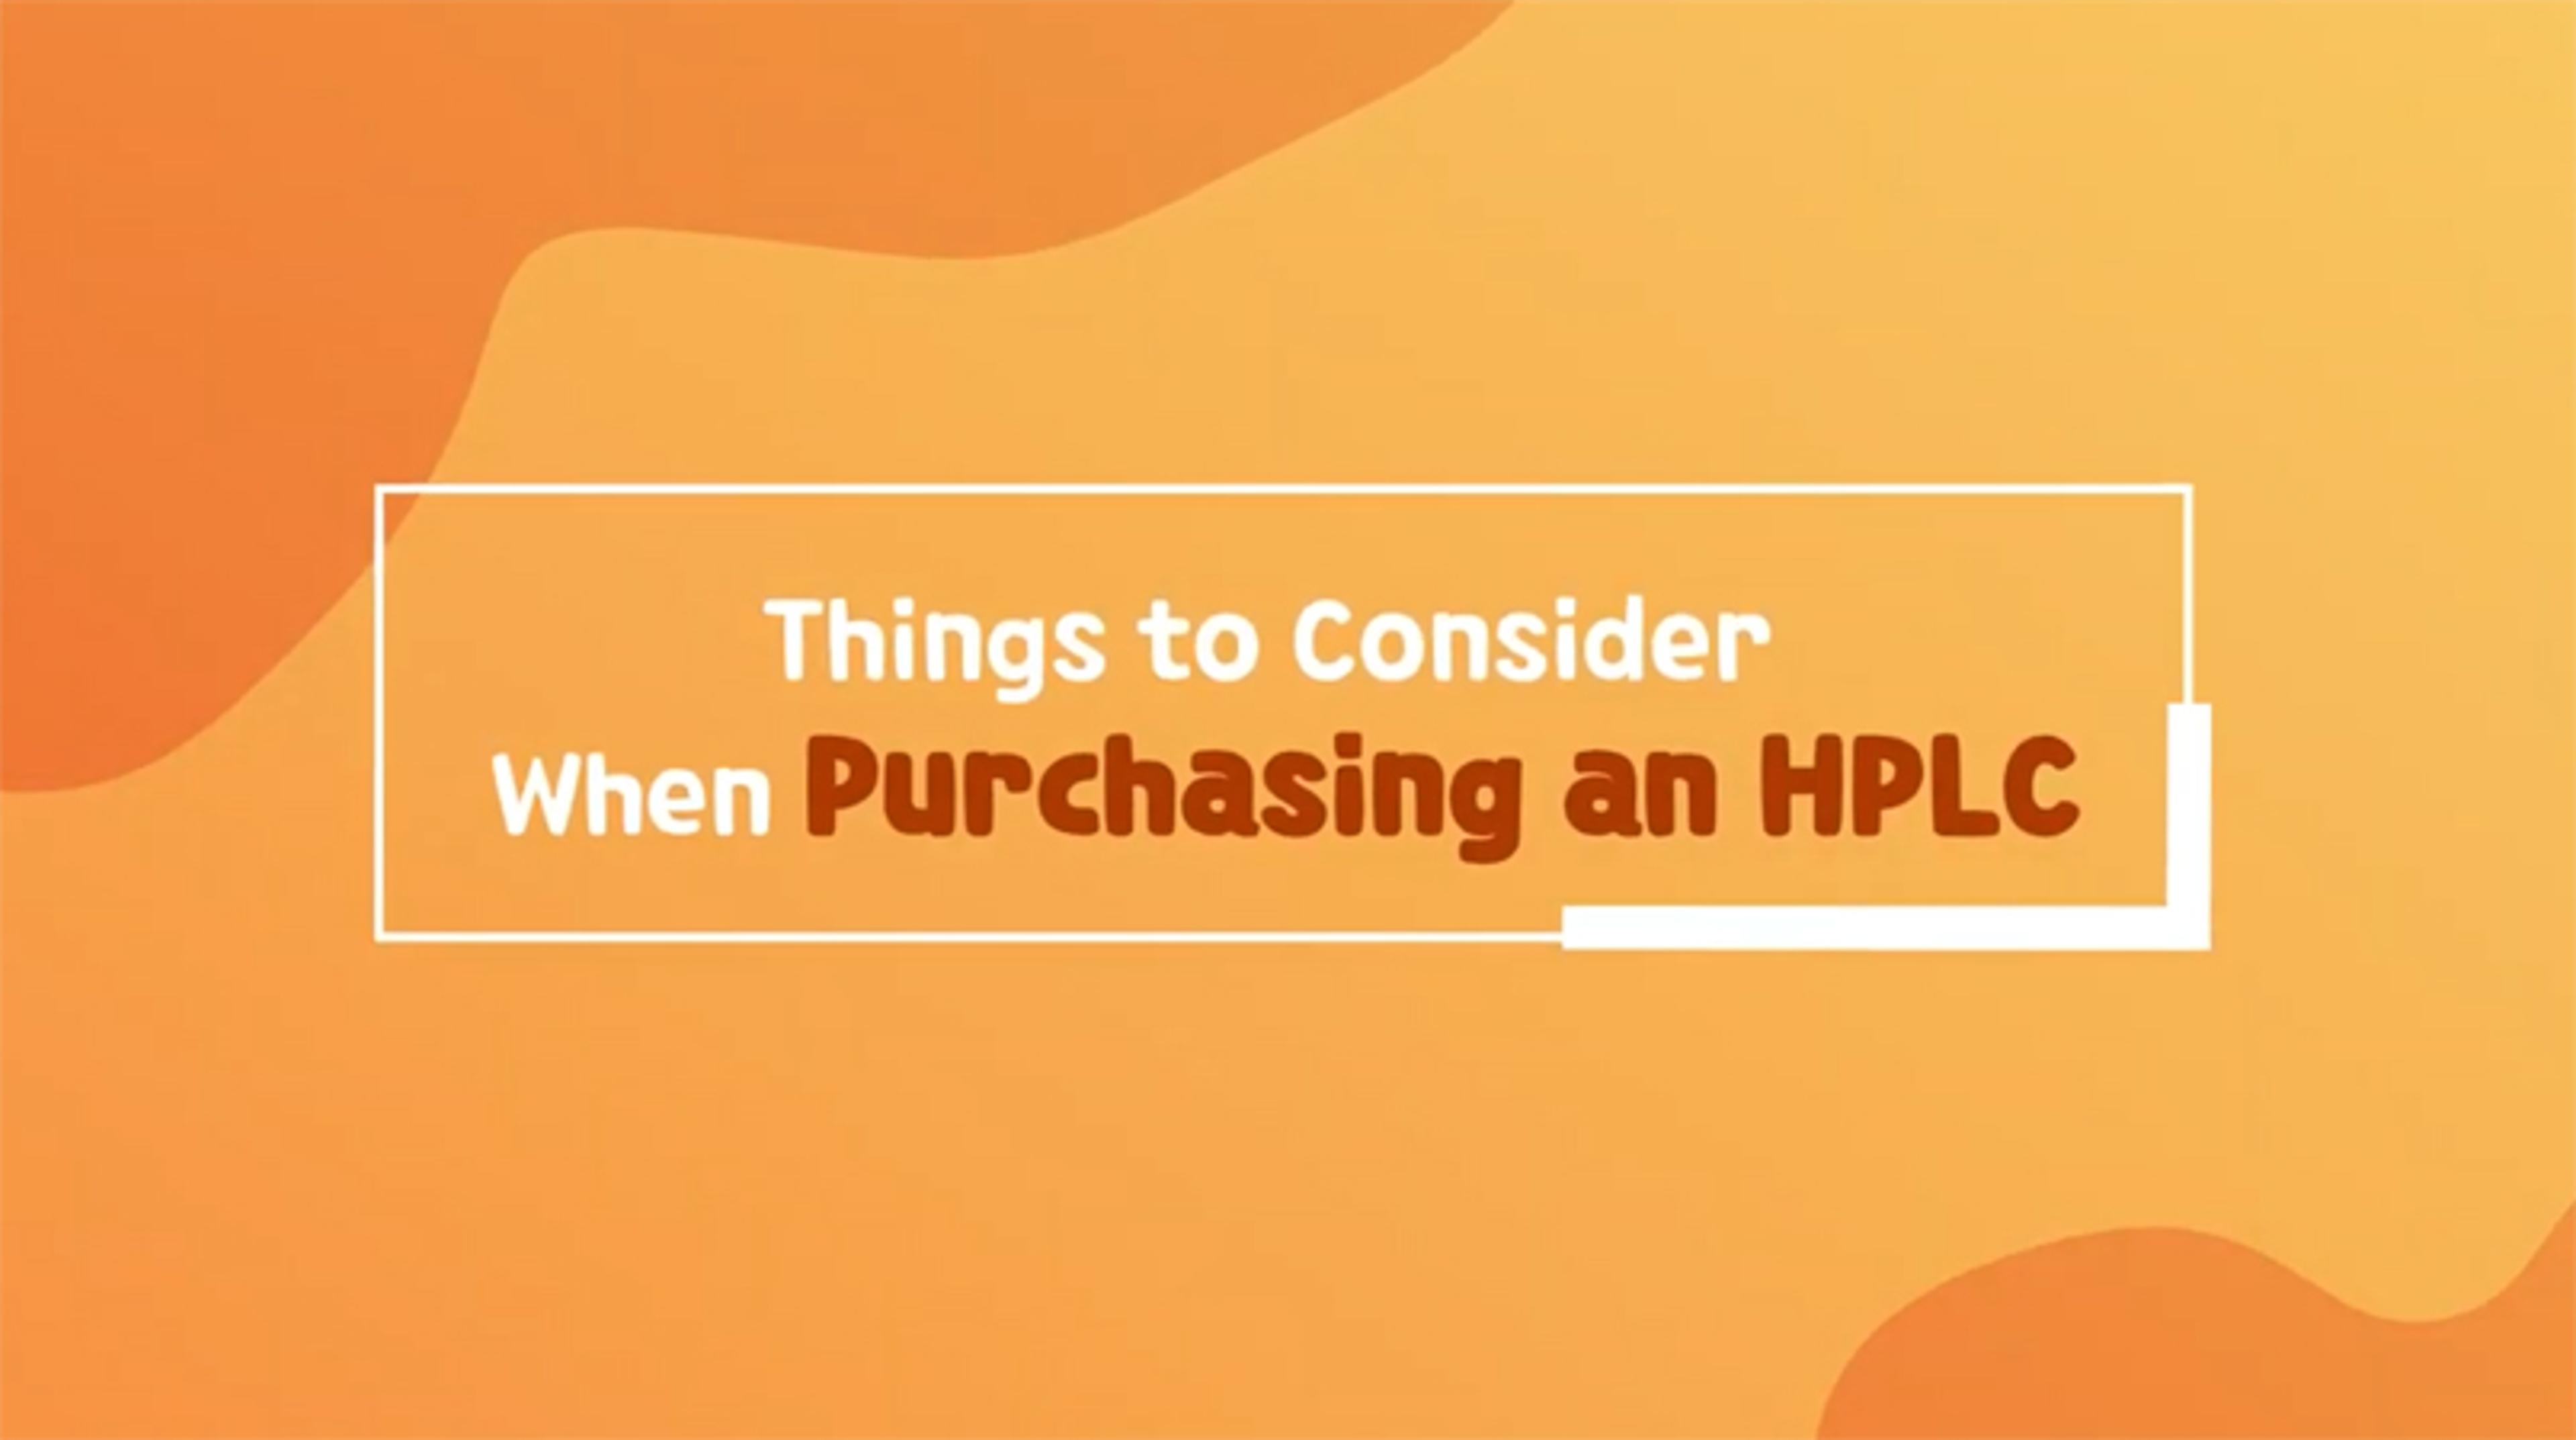 Things to consider when purchasing a HPLC